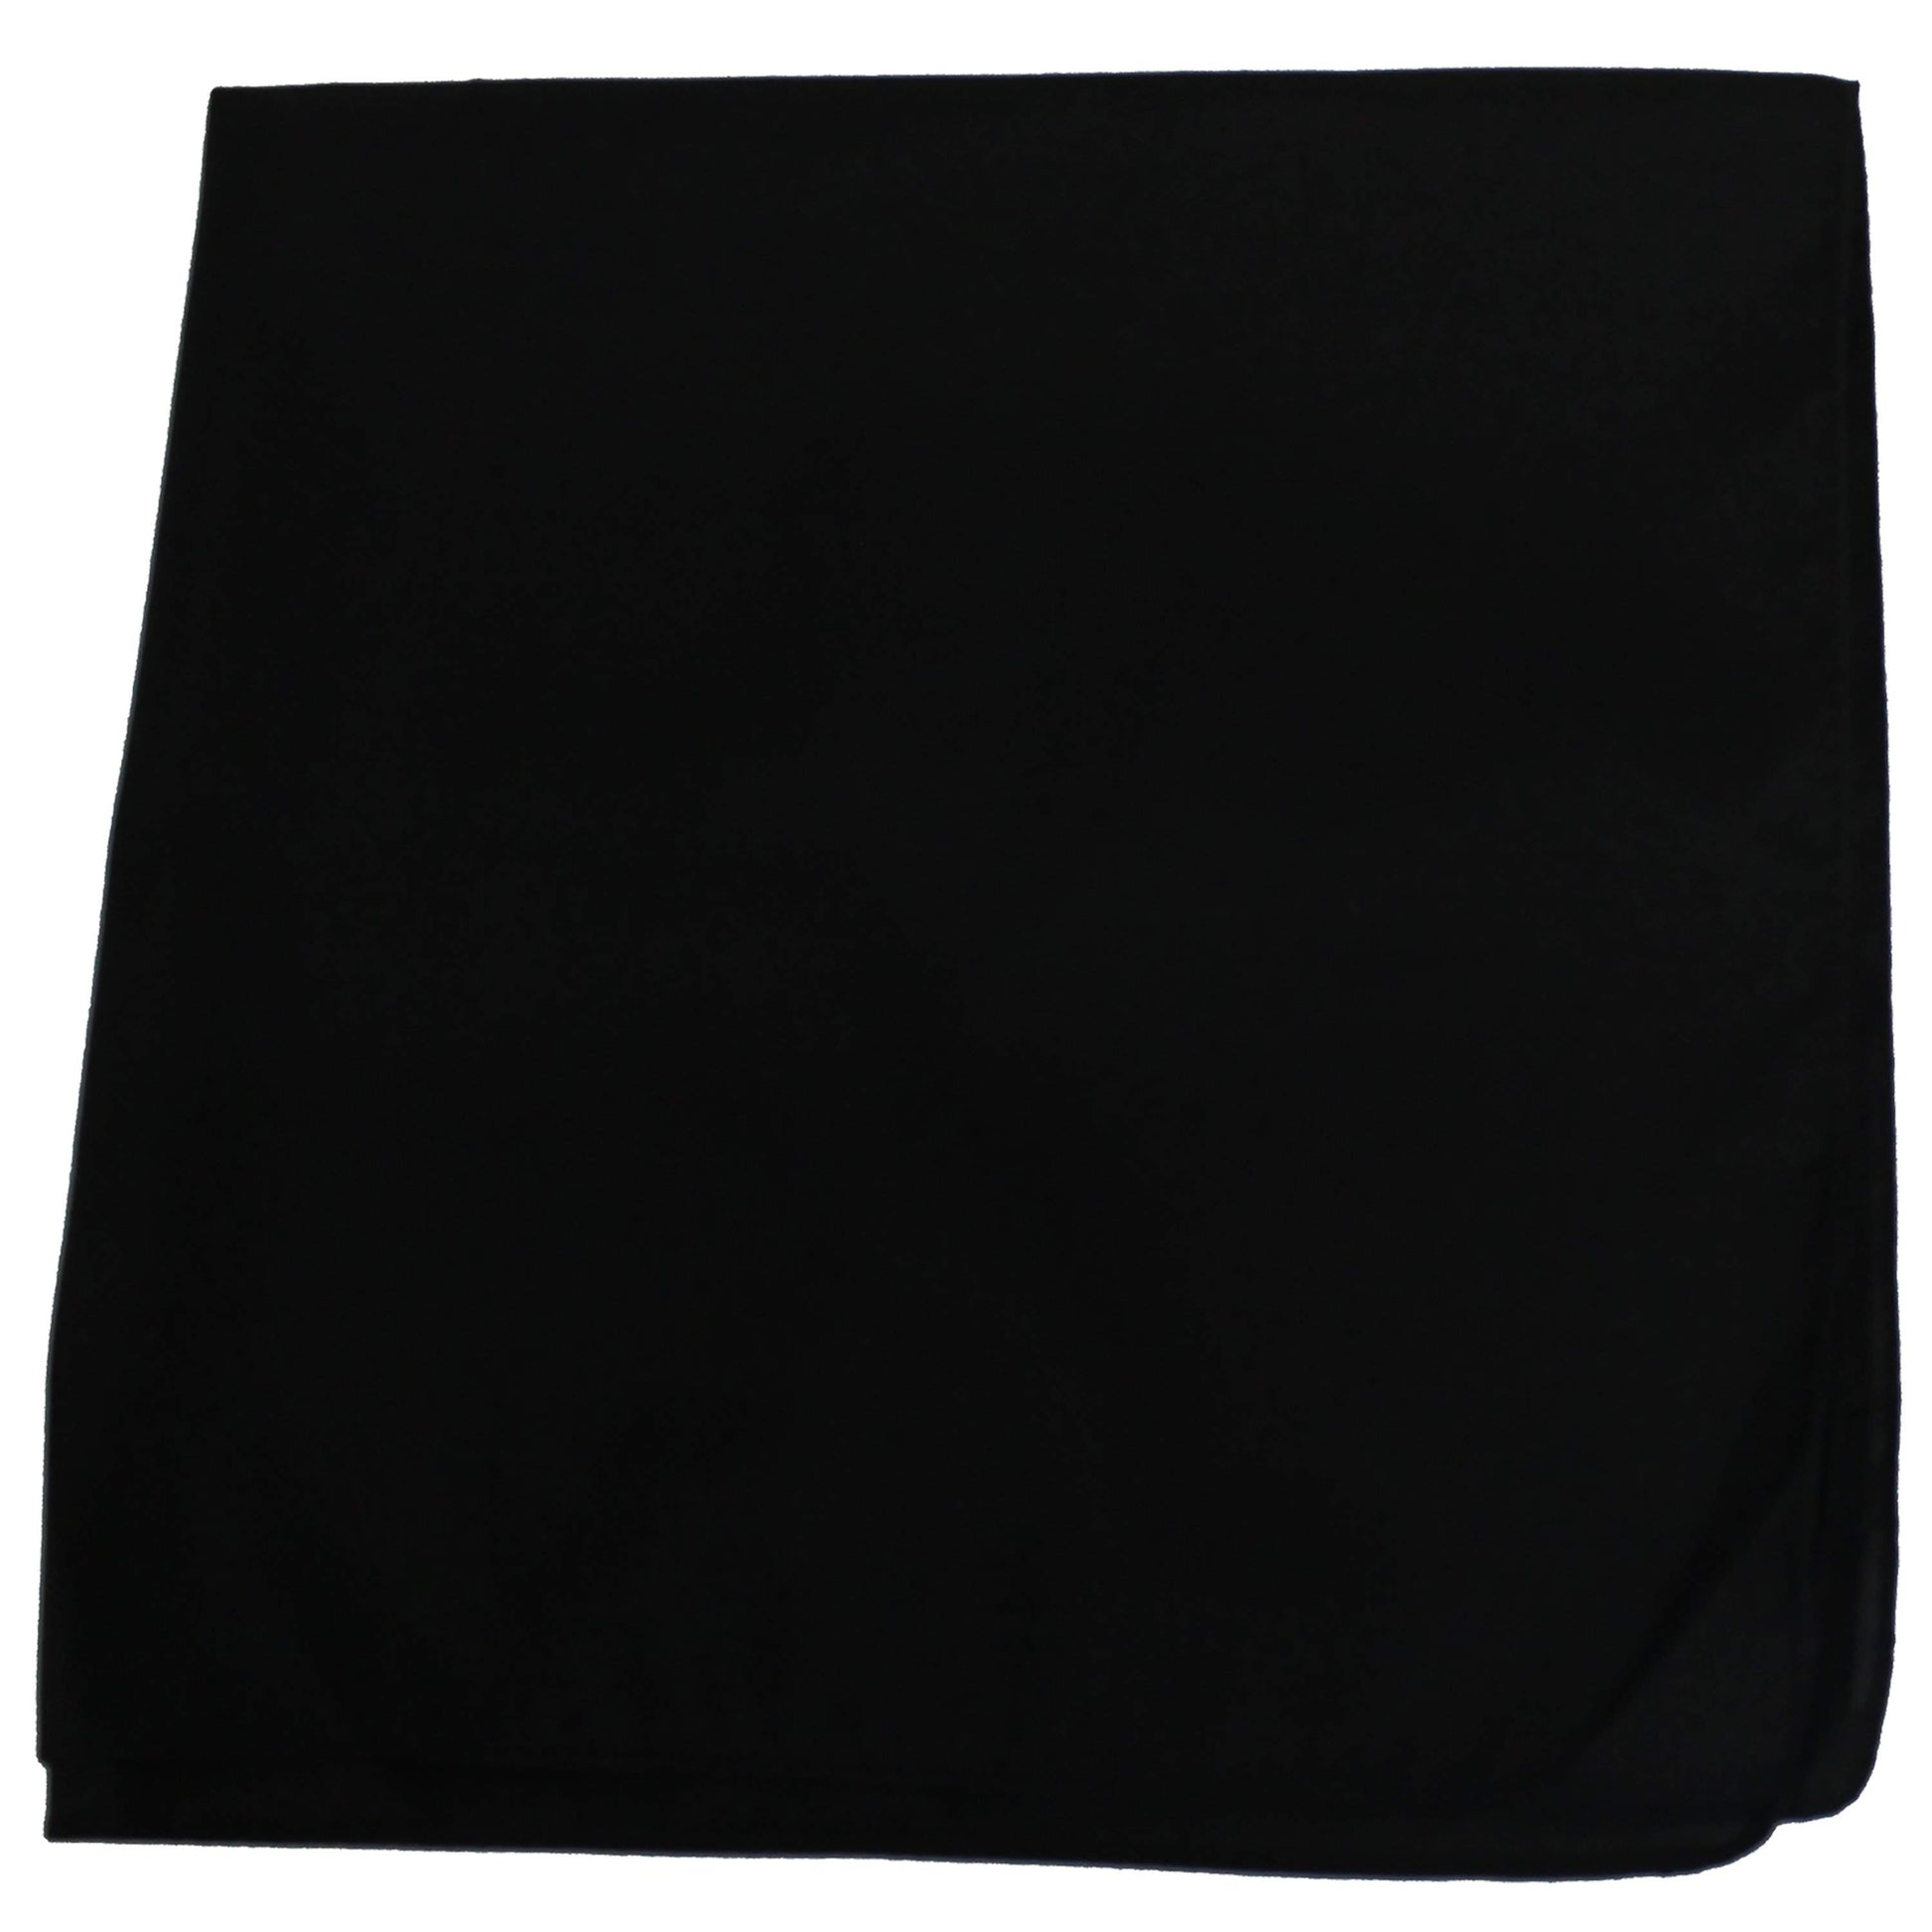 Mechaly Polyester XL Extra Large Solid Bandana - 27 x 27 Inches - 6 Pack